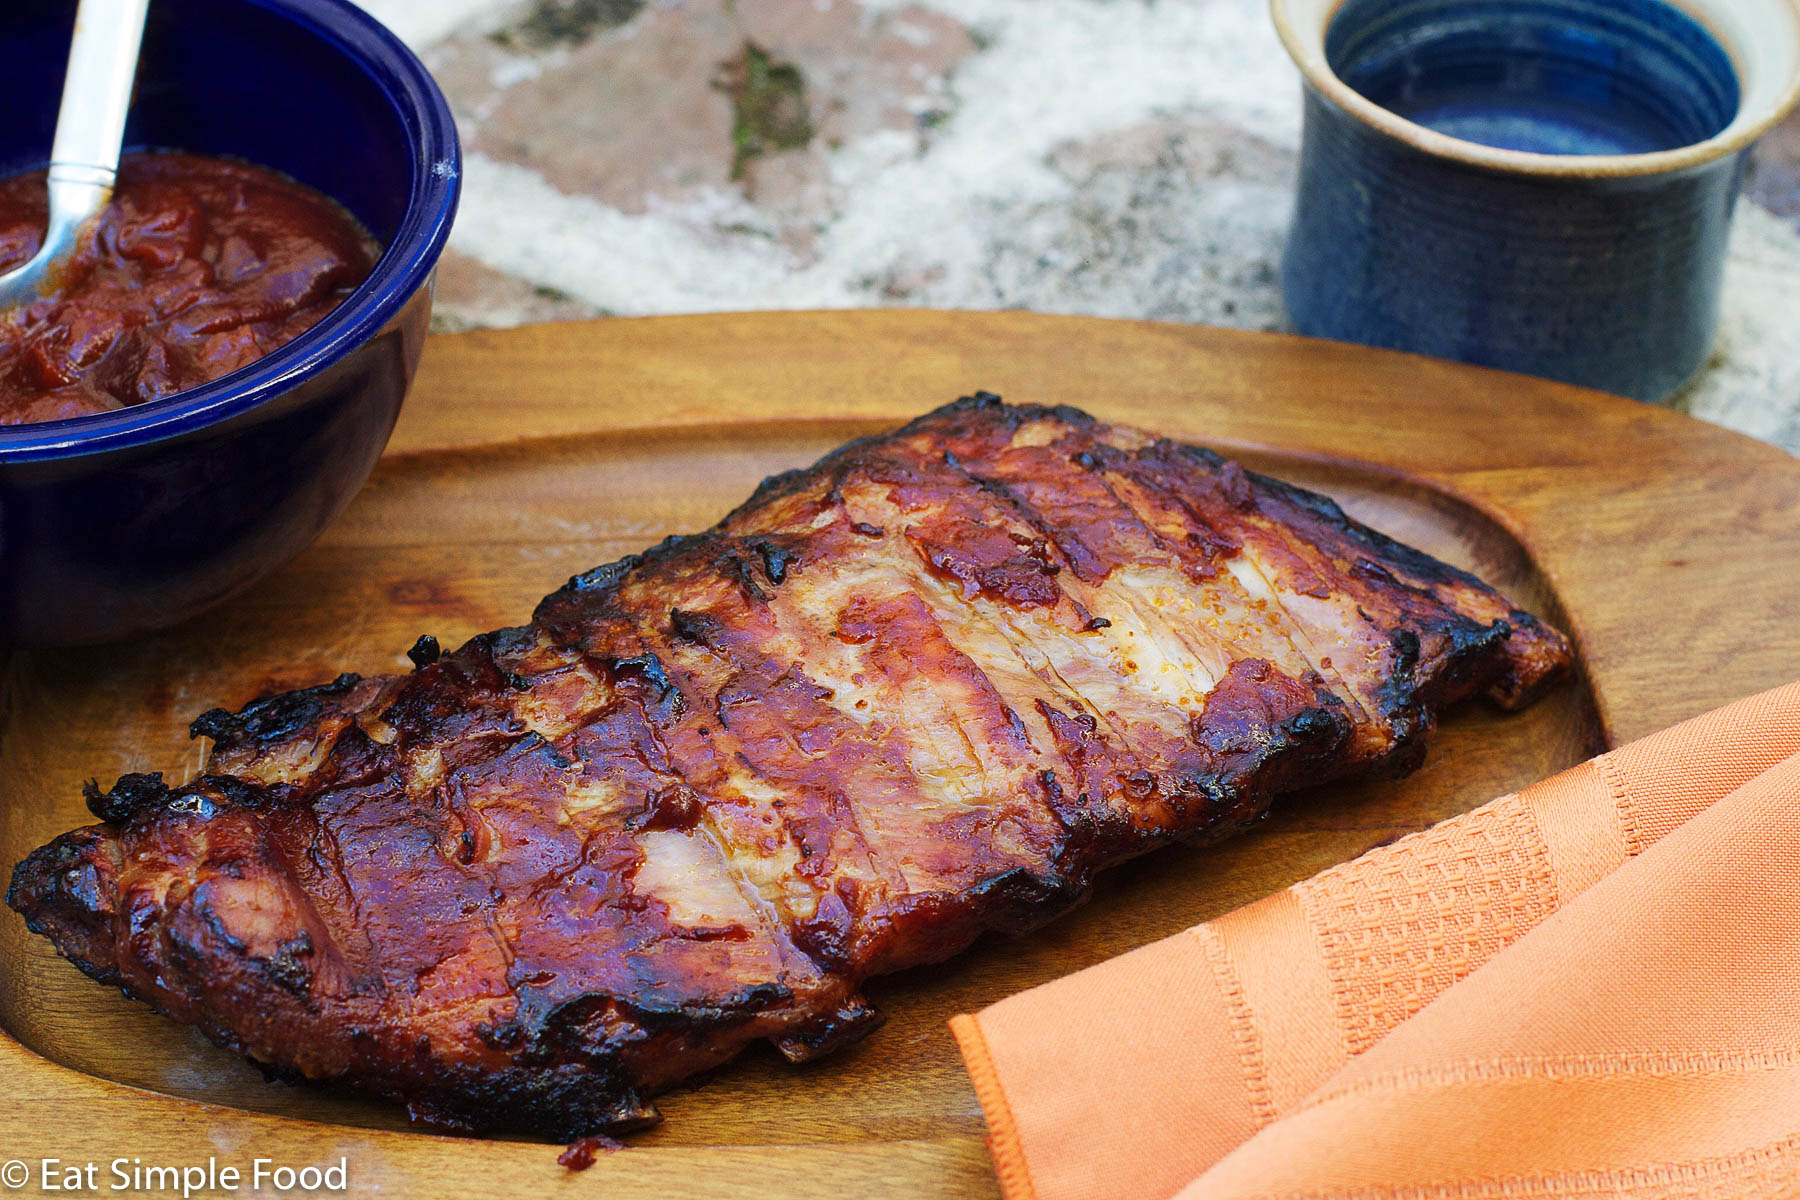 St. Louis Ribs Baked In BBQ sauce on a wood plate with an orange napkin.